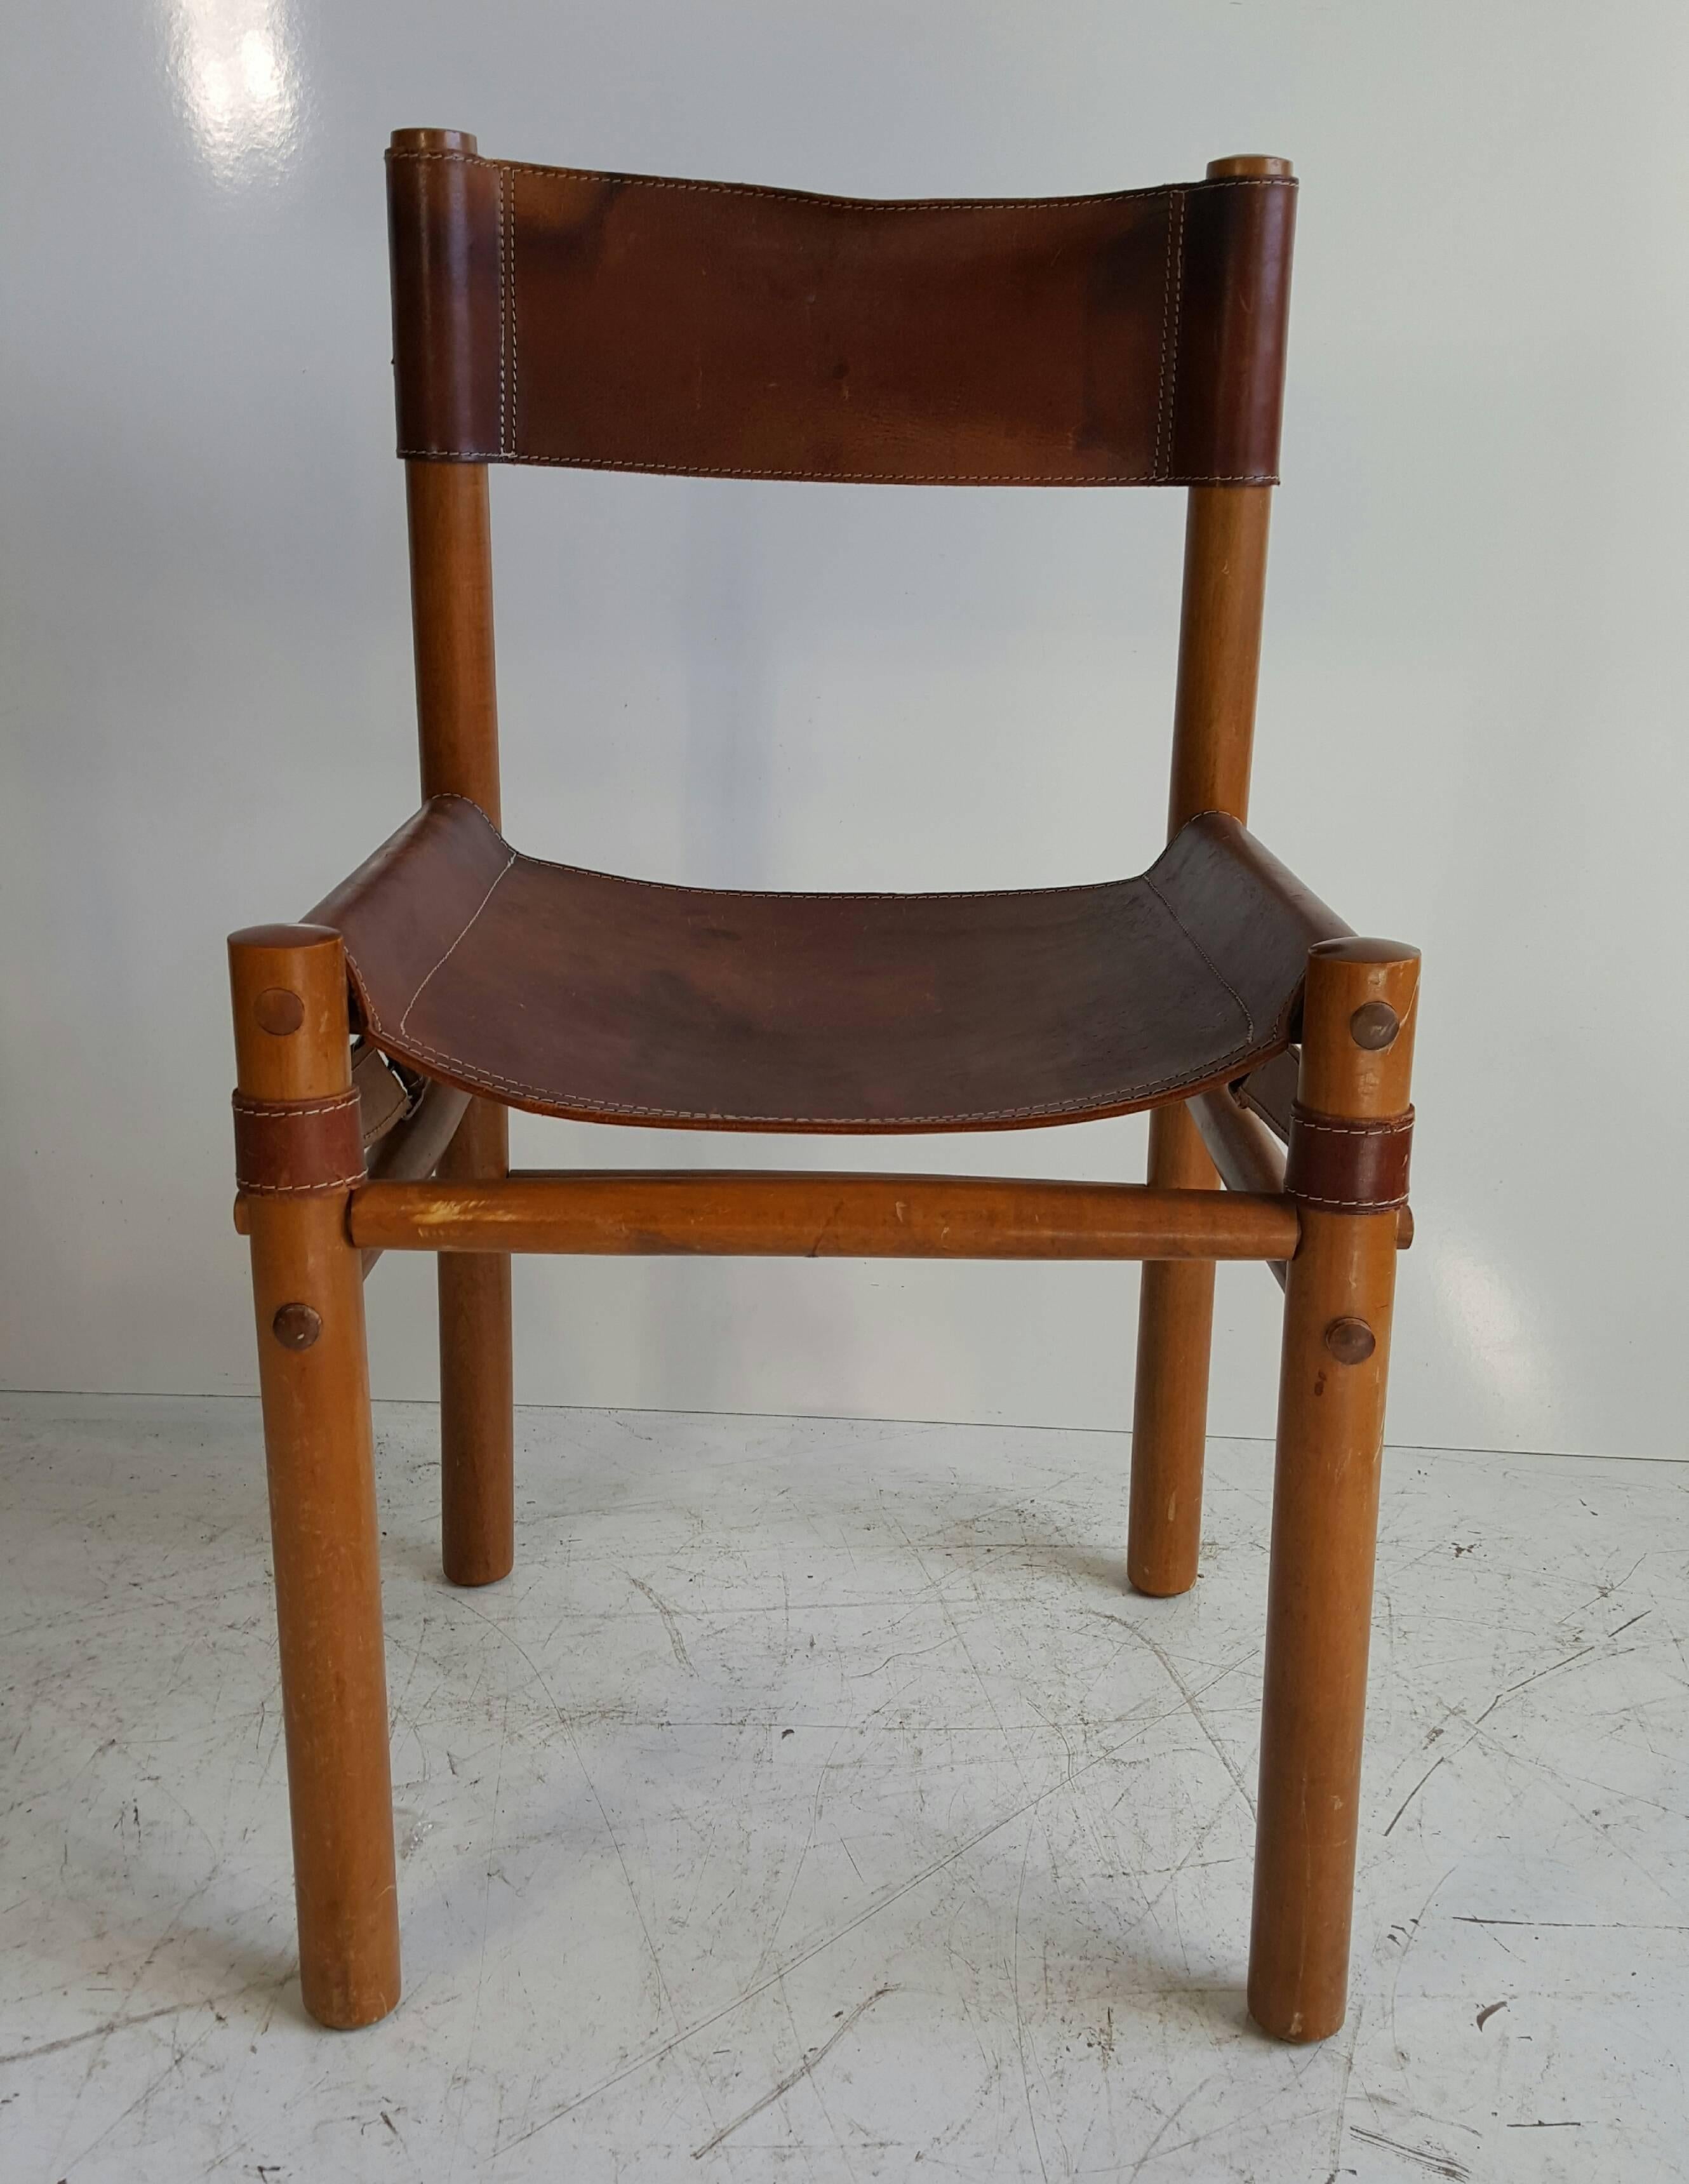 Arne Norell leather safari side chair. Made in Denmark. Retains original brown leather sling seat and back. Extremely comfortable.